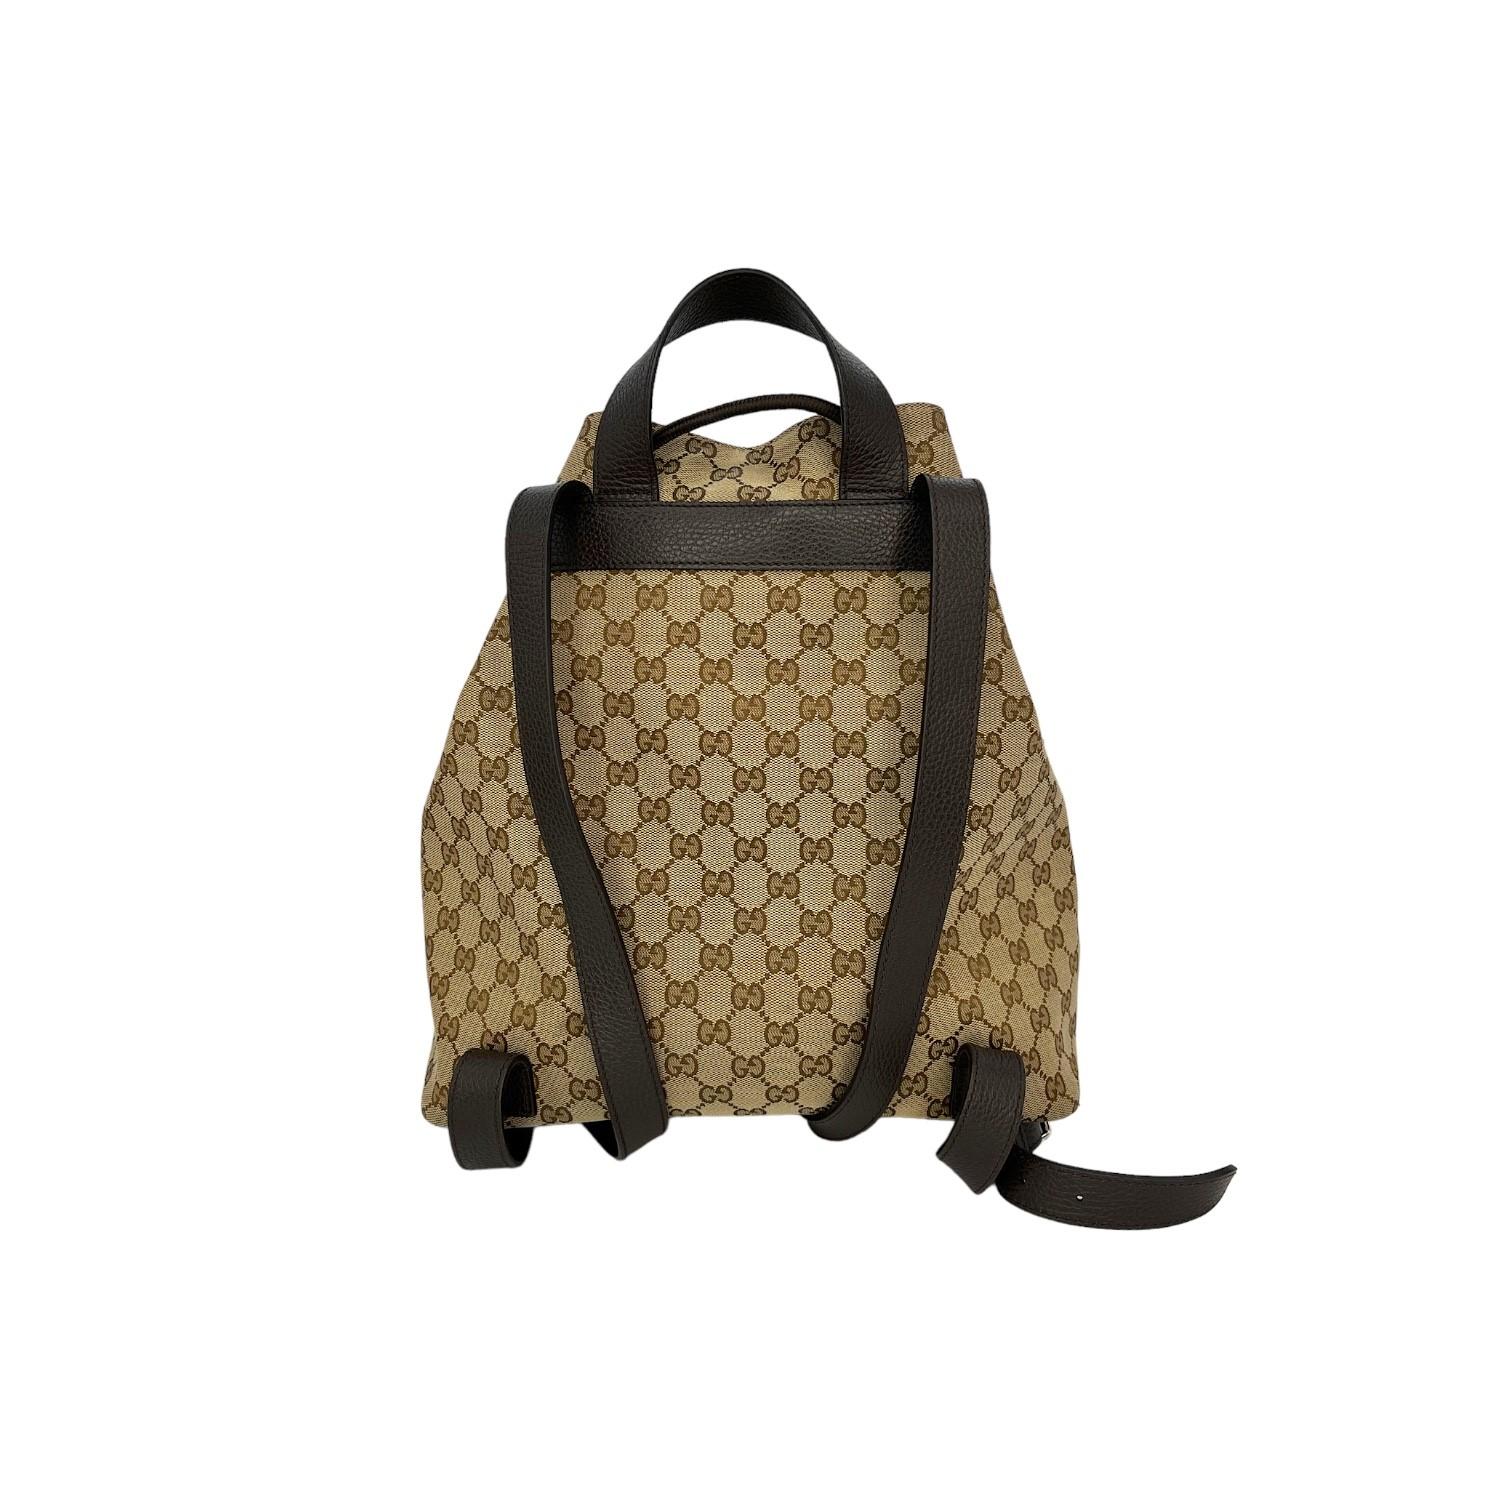 This Gucci GG Supreme Drawstring Backpack was made in Italy and it is finely crafted of Gucci's iconic GG Supreme canvas exterior with leather trimming and silver-tone hardware features. It has a leather top handle and it also has adjustable leather